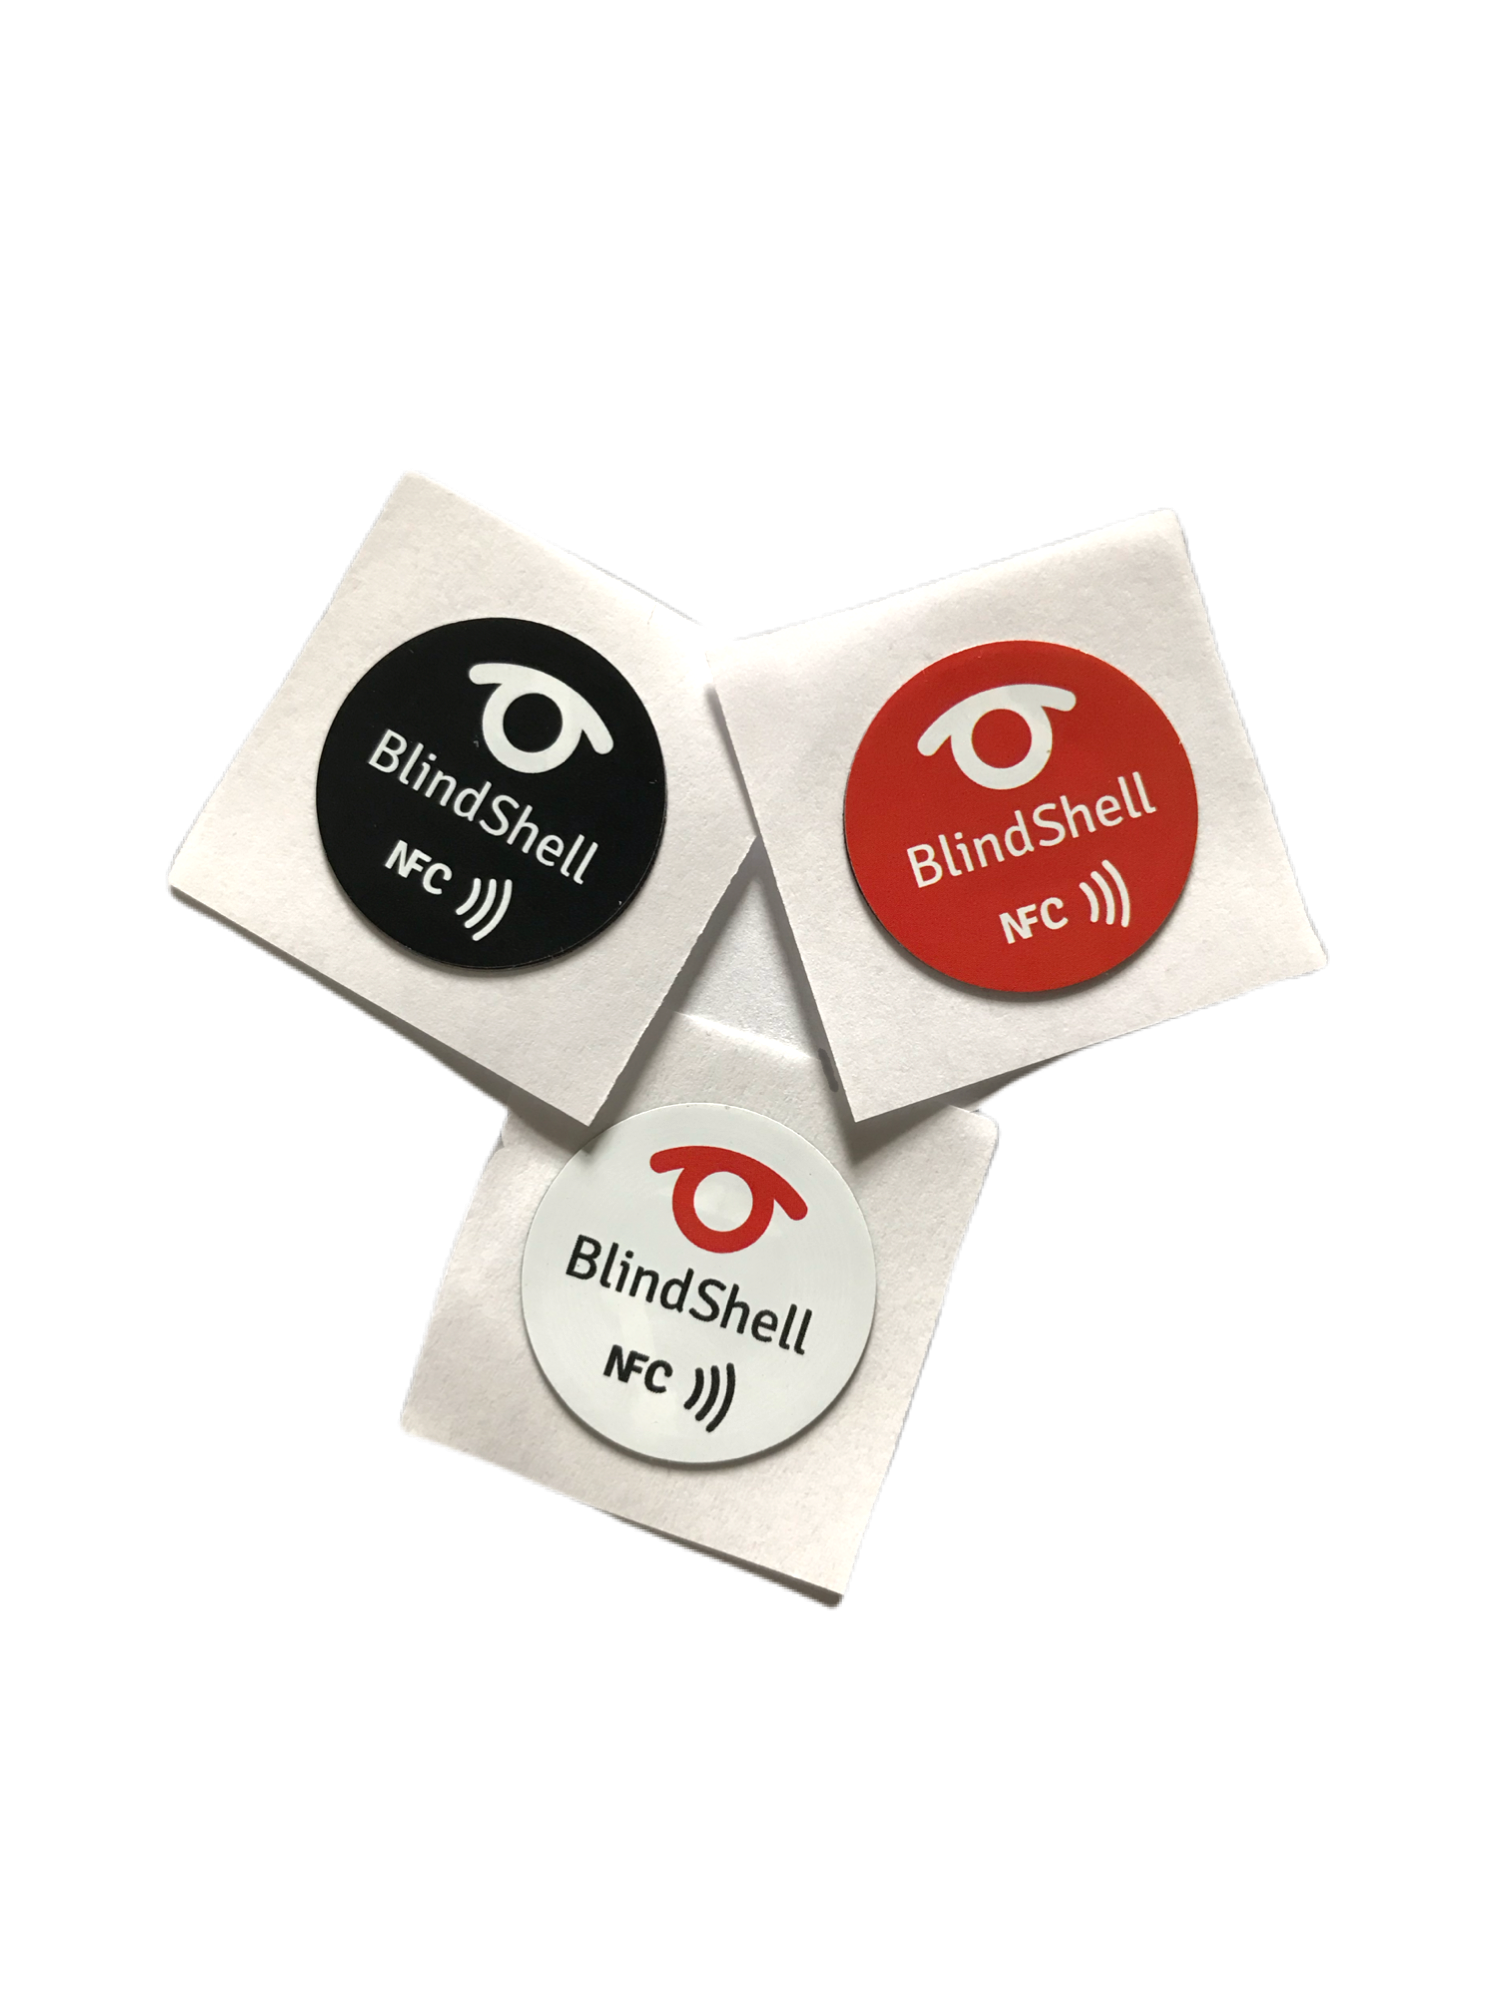 3 BlindShell Classic 2 NFC Tags in red black and white